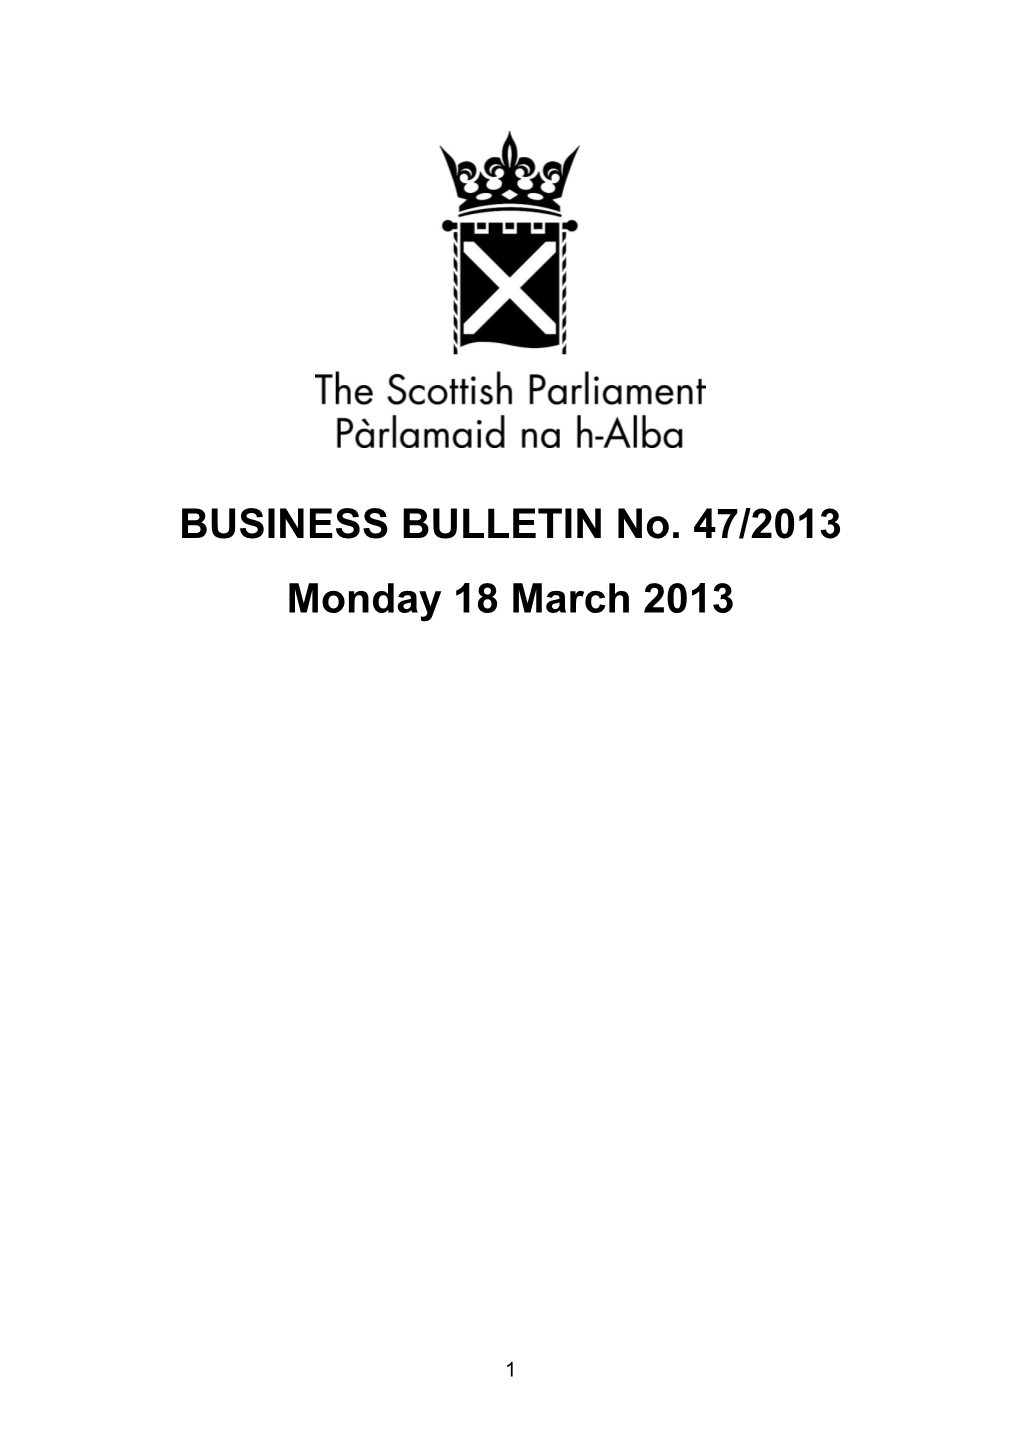 BUSINESS BULLETIN No. 47/2013 Monday 18 March 2013